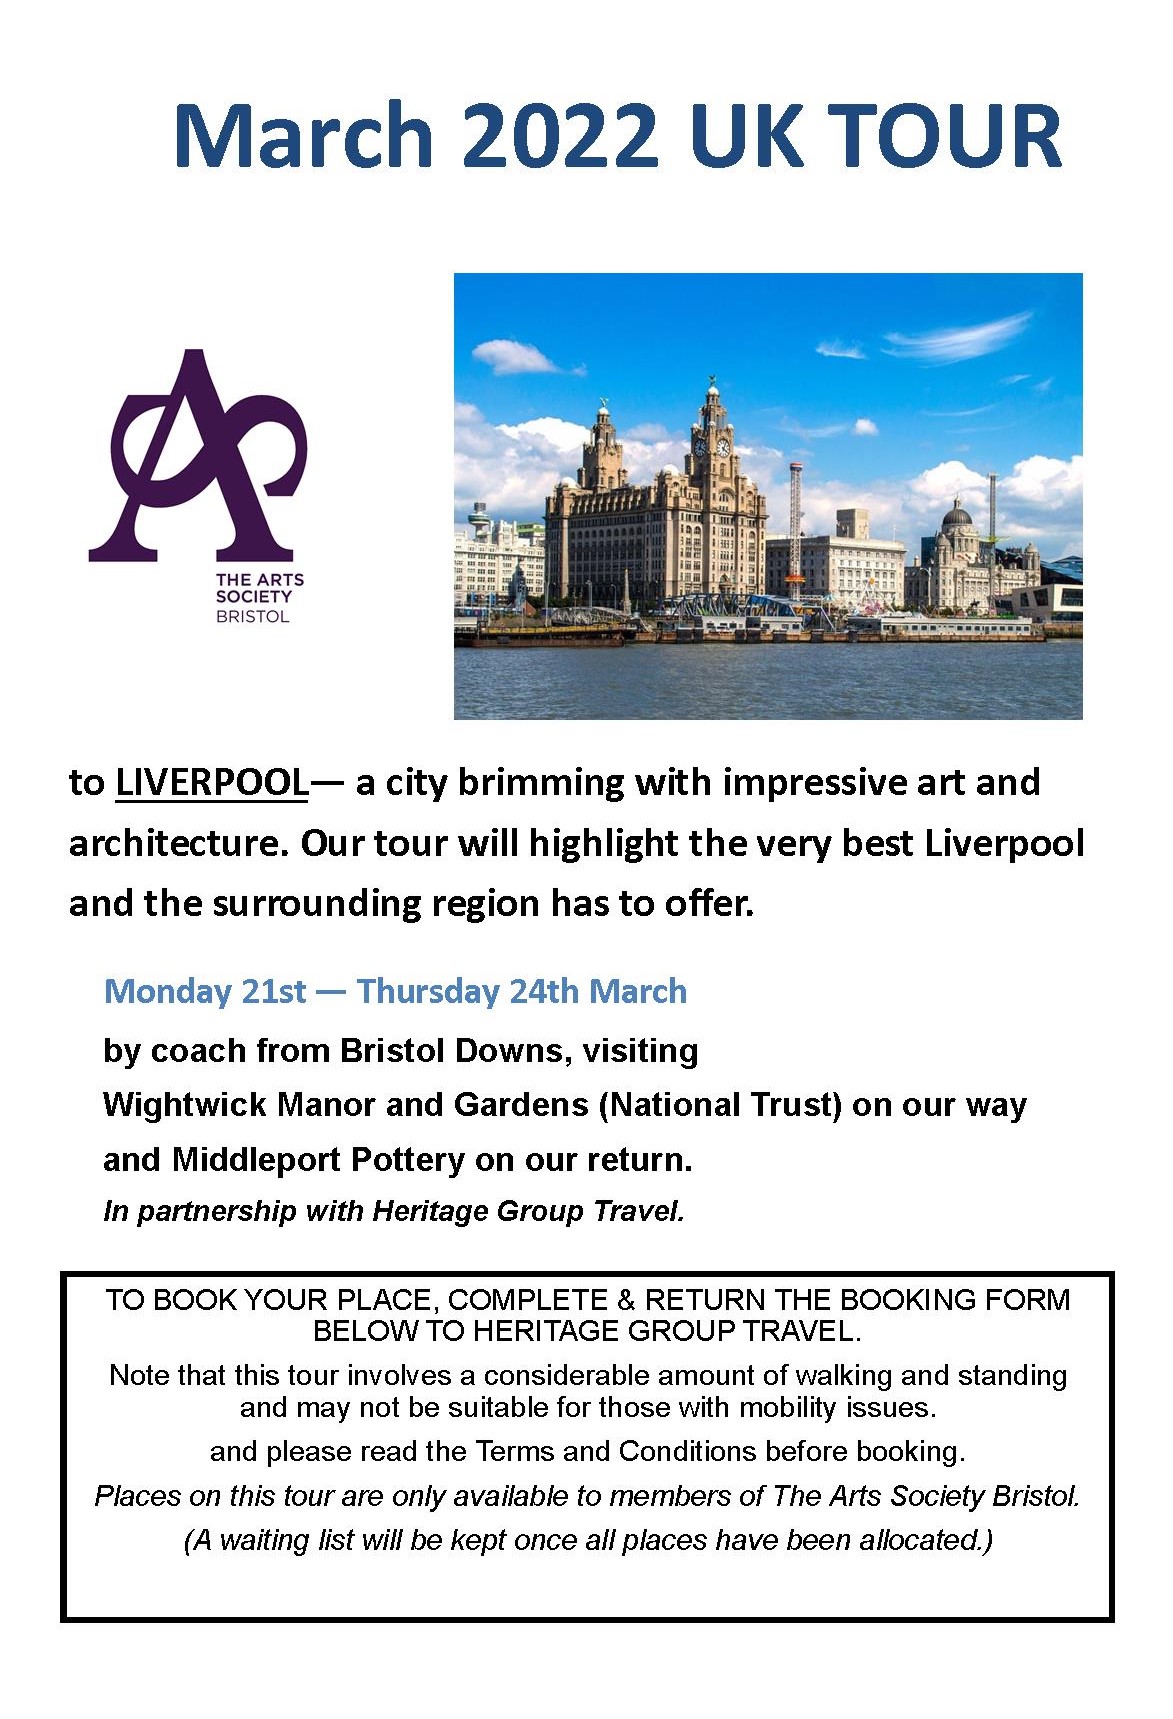 ASB March 2022 Tour to Liverpool